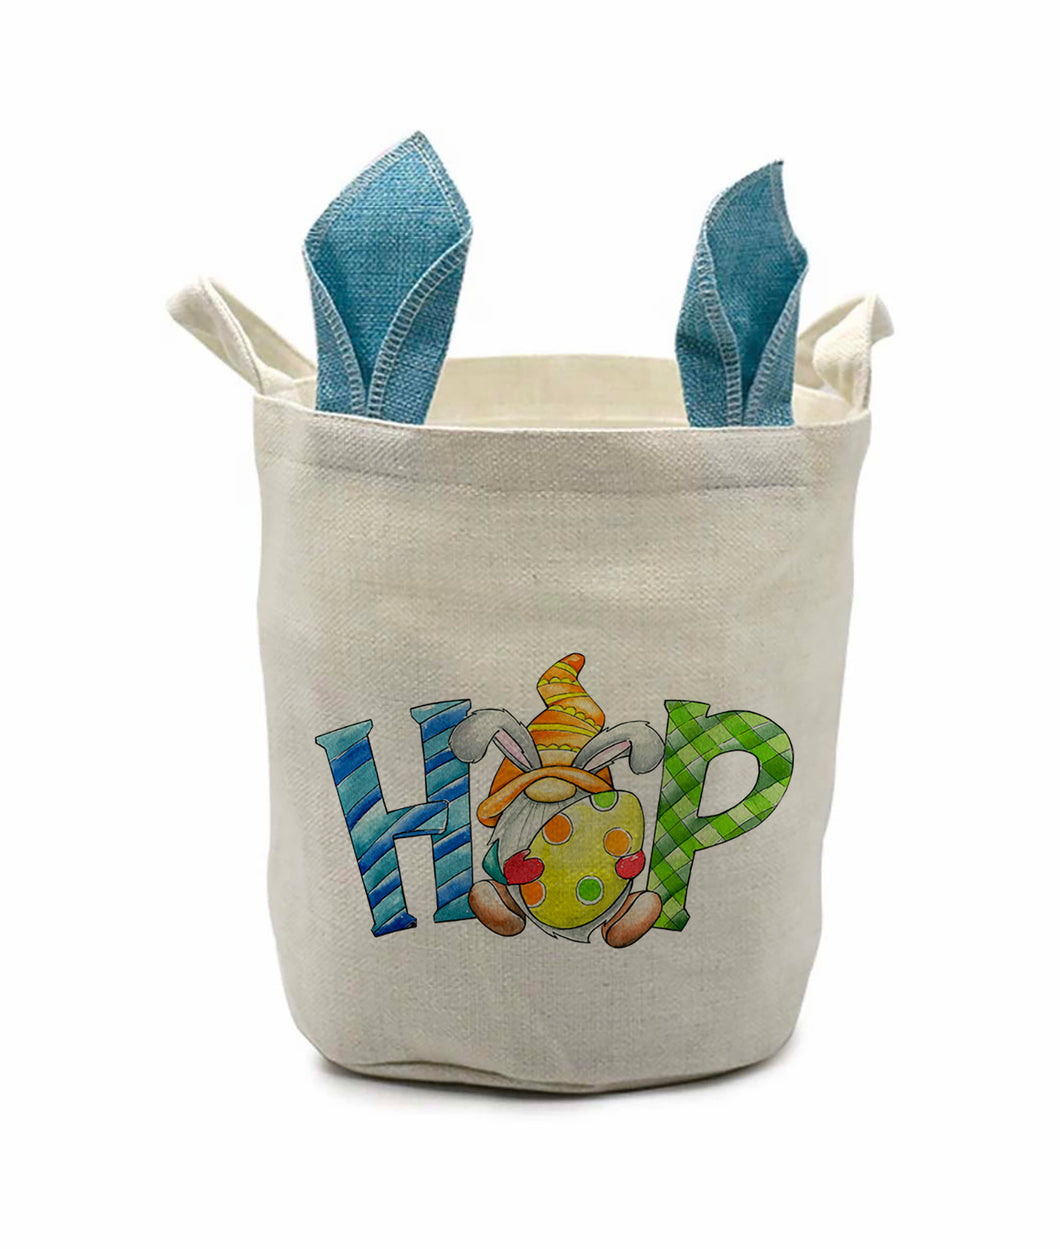 Cloth bag with pink or blue bunny ears and Gnome